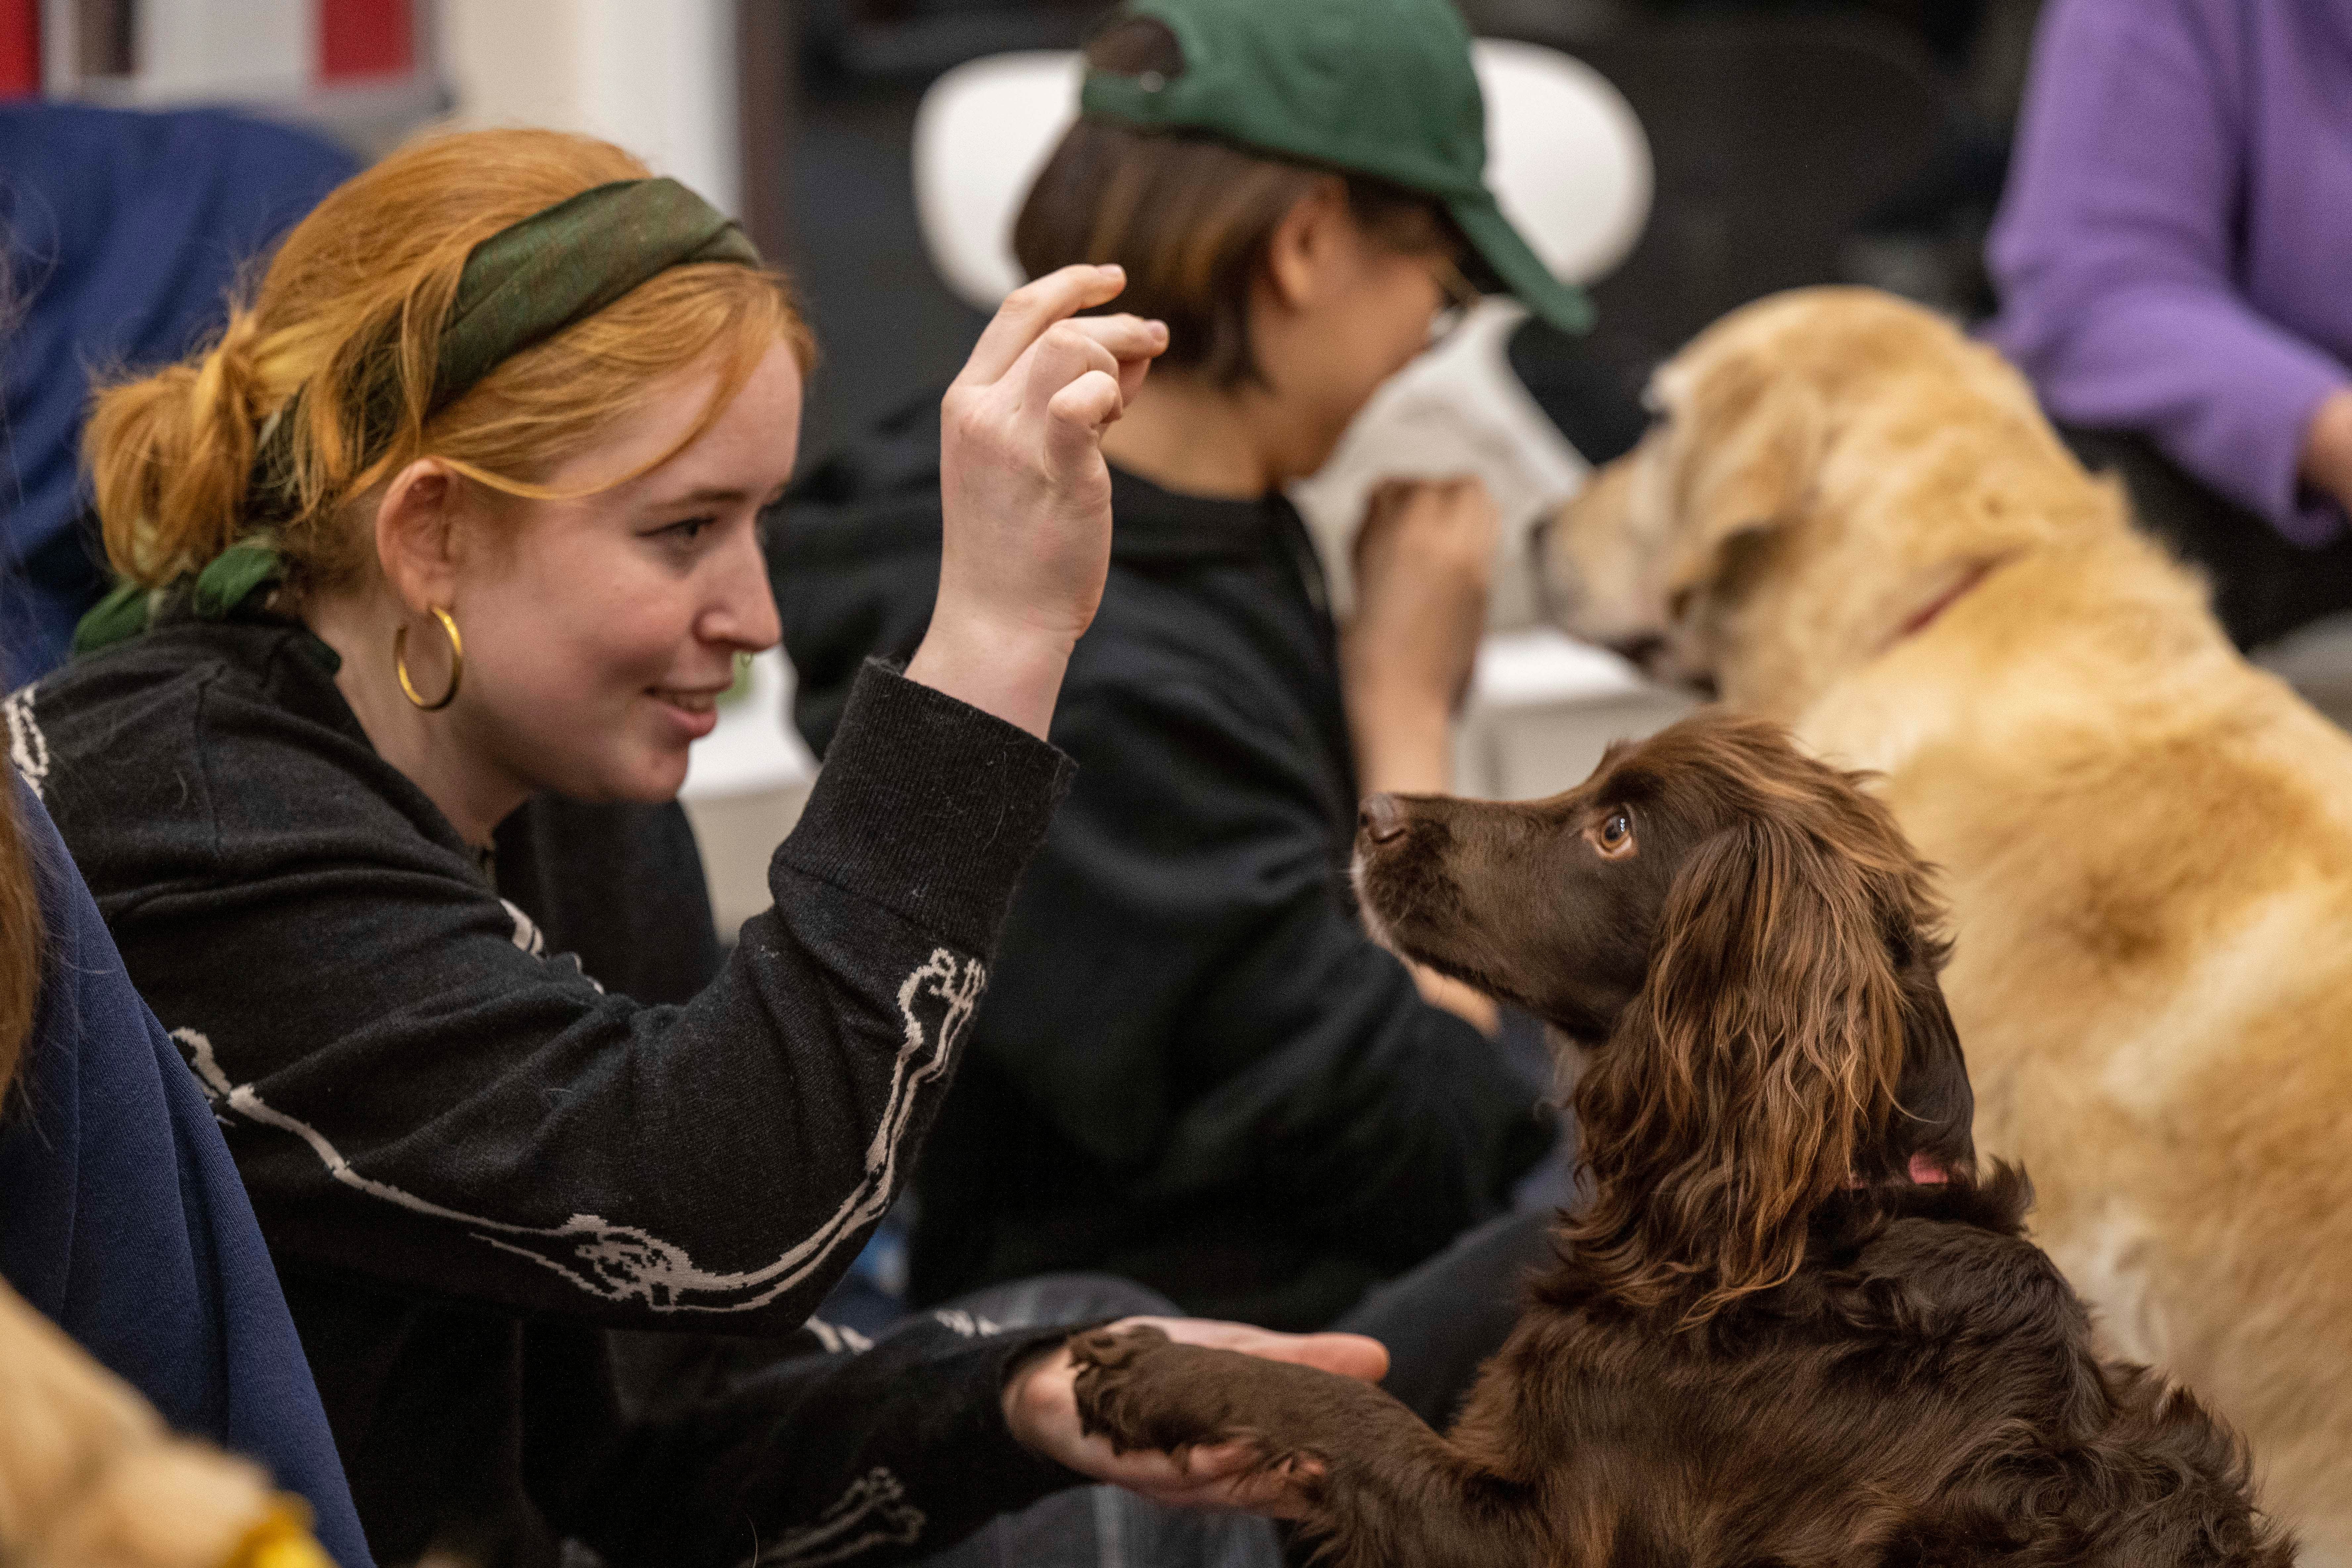 The University of Edinburgh has launched a new programme using dogs to help with the mental health of its students (University of Edinburgh)